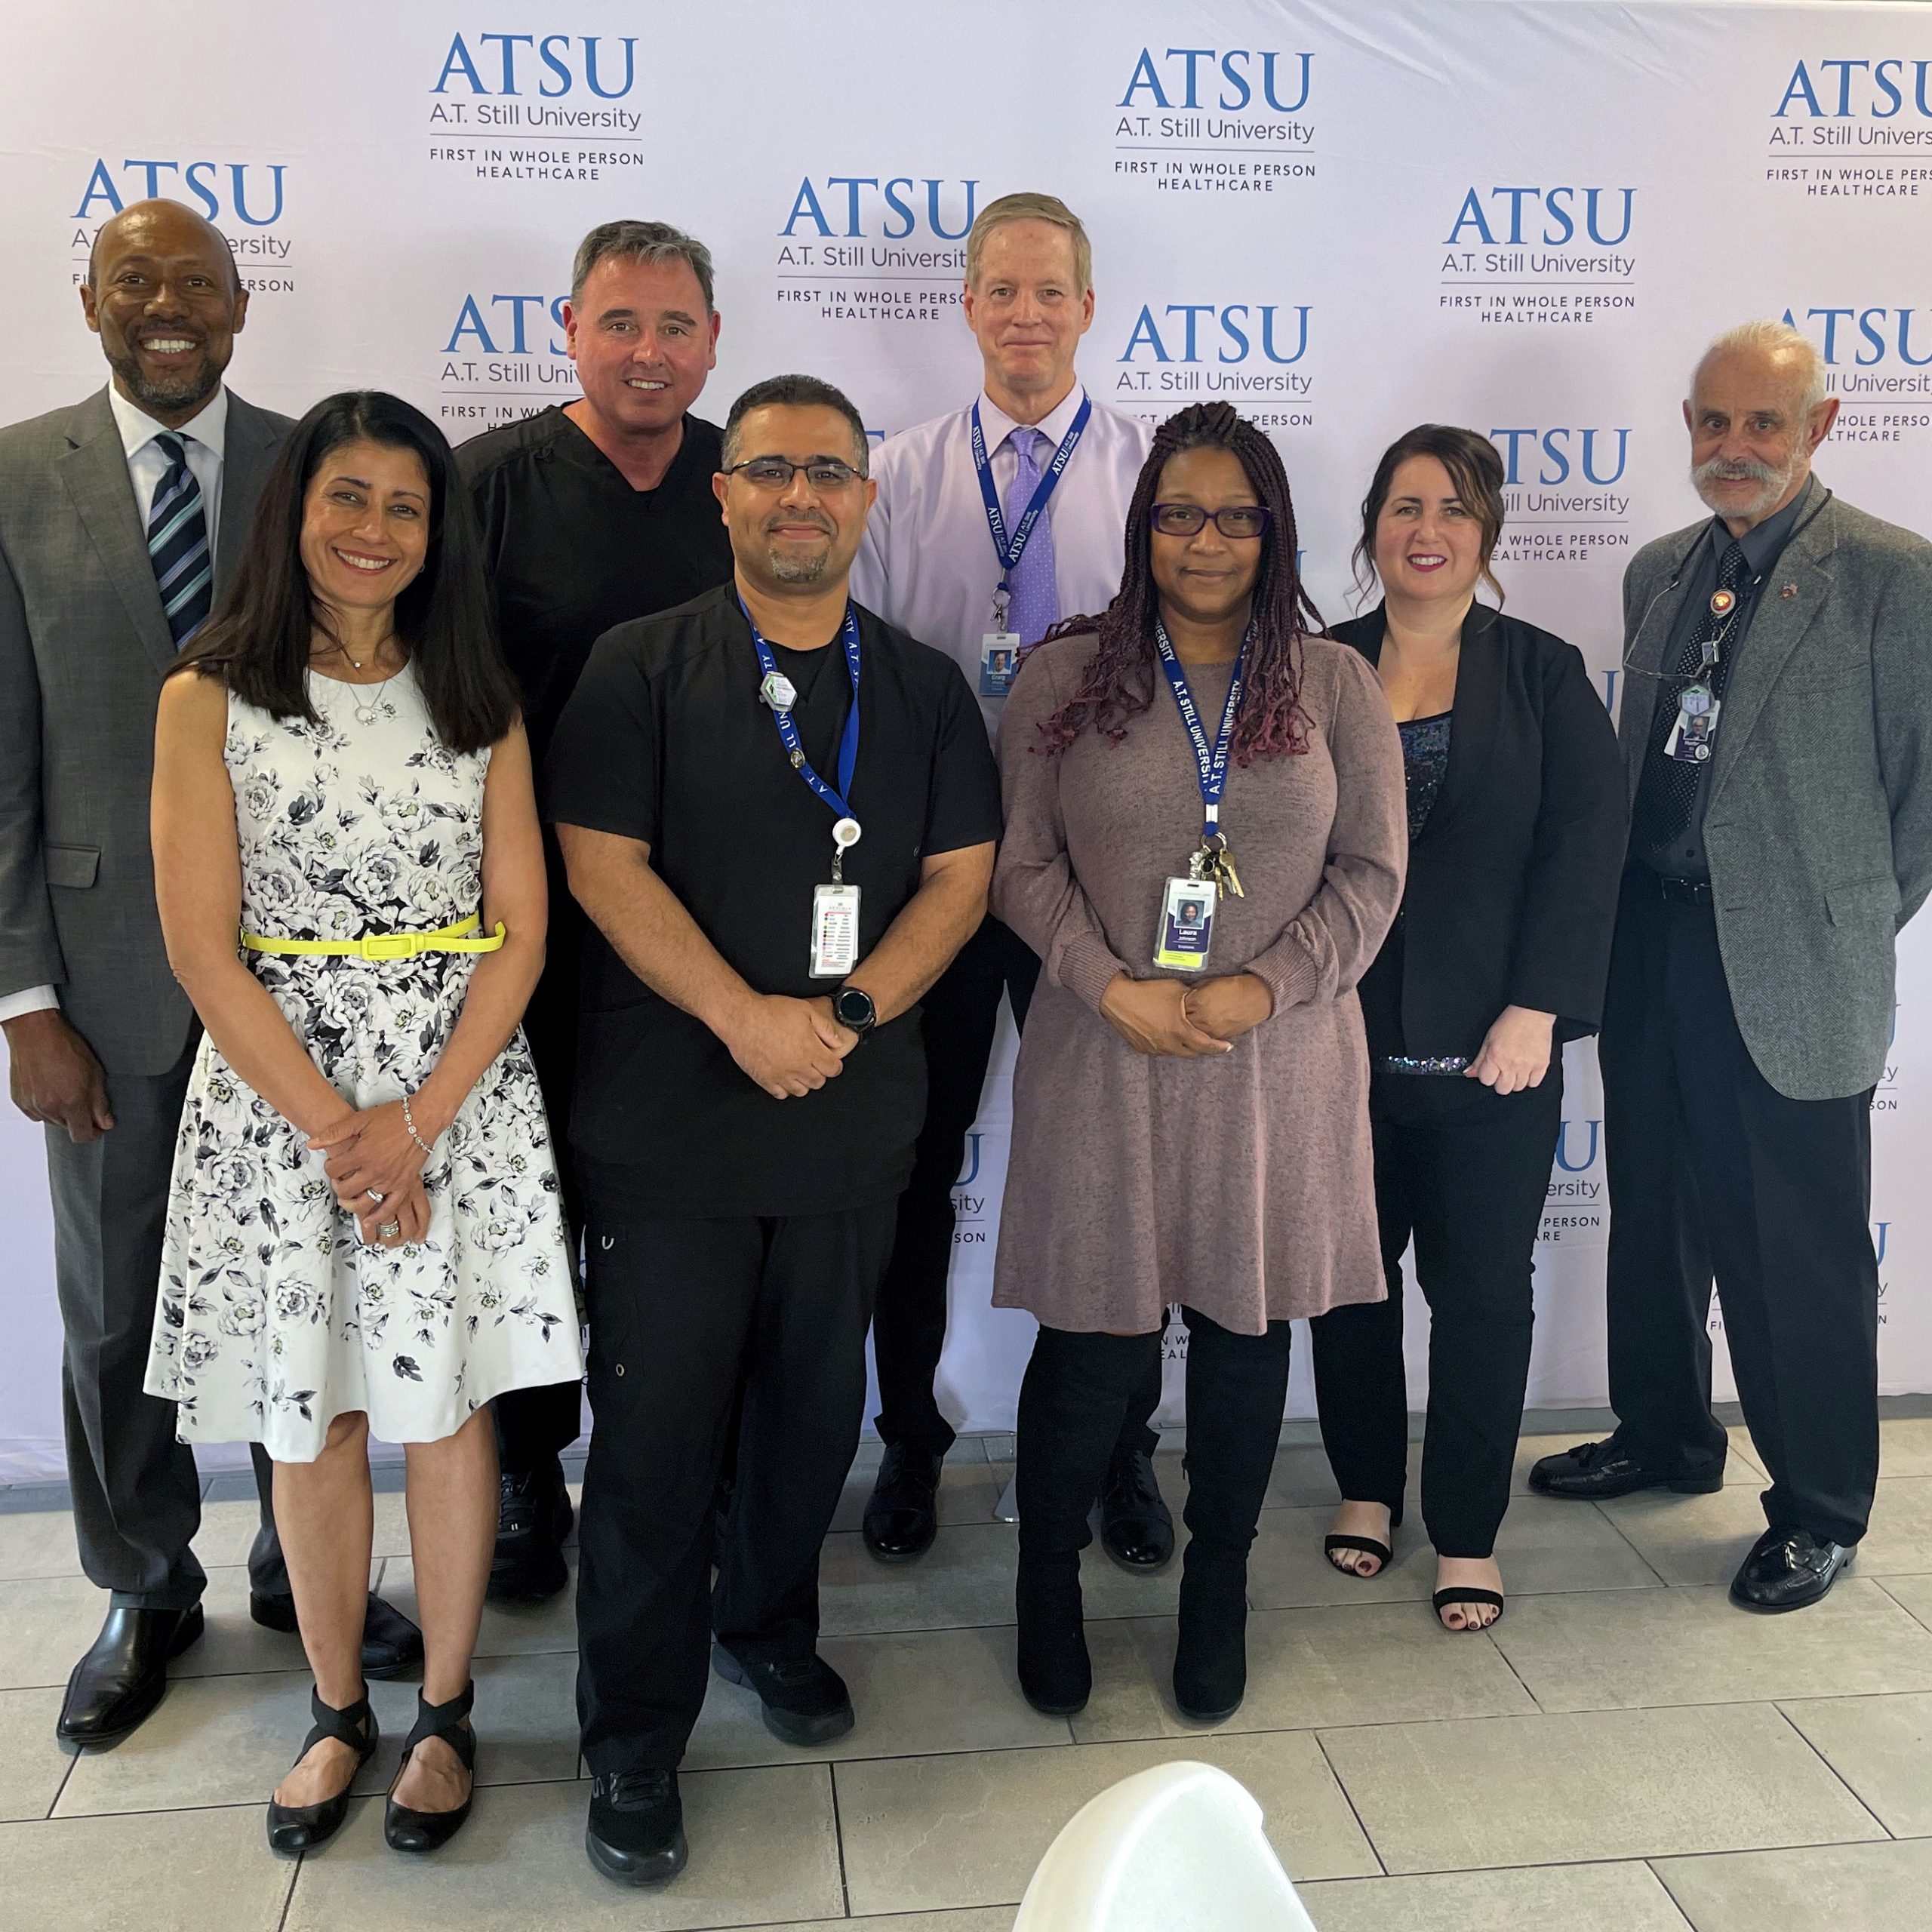 ATSU’s St. Louis Dental Center employees honored with award, service recognitions